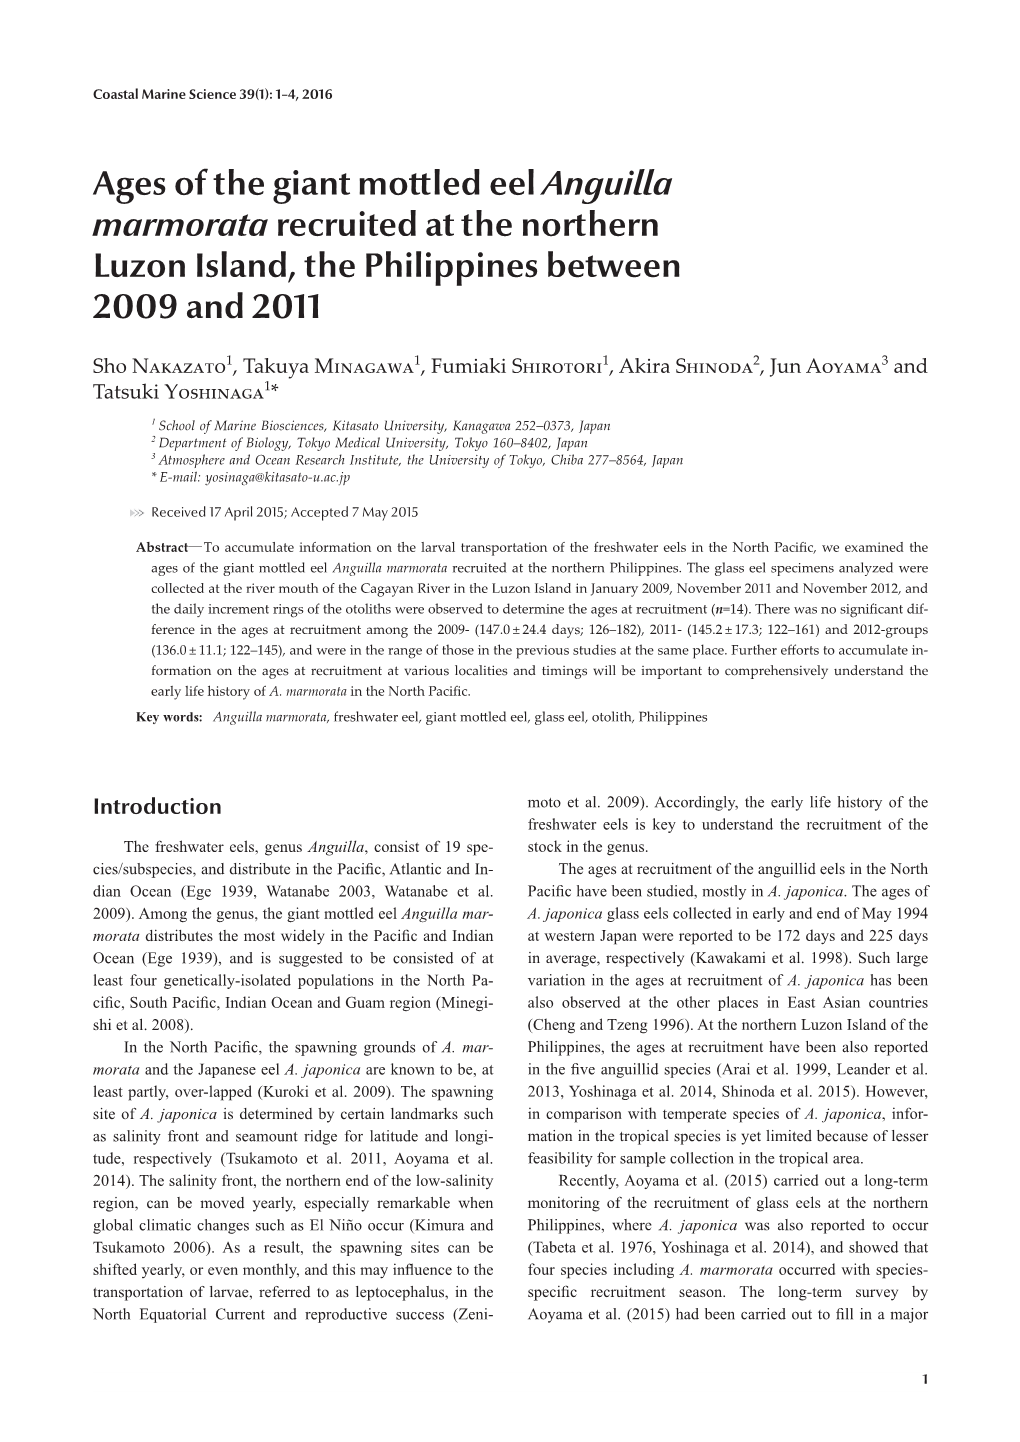 Ages of the Giant Mottled Eel Anguilla Marmorata Recruited at the Northern Luzon Island, the Philippines Between 2009 and 2011